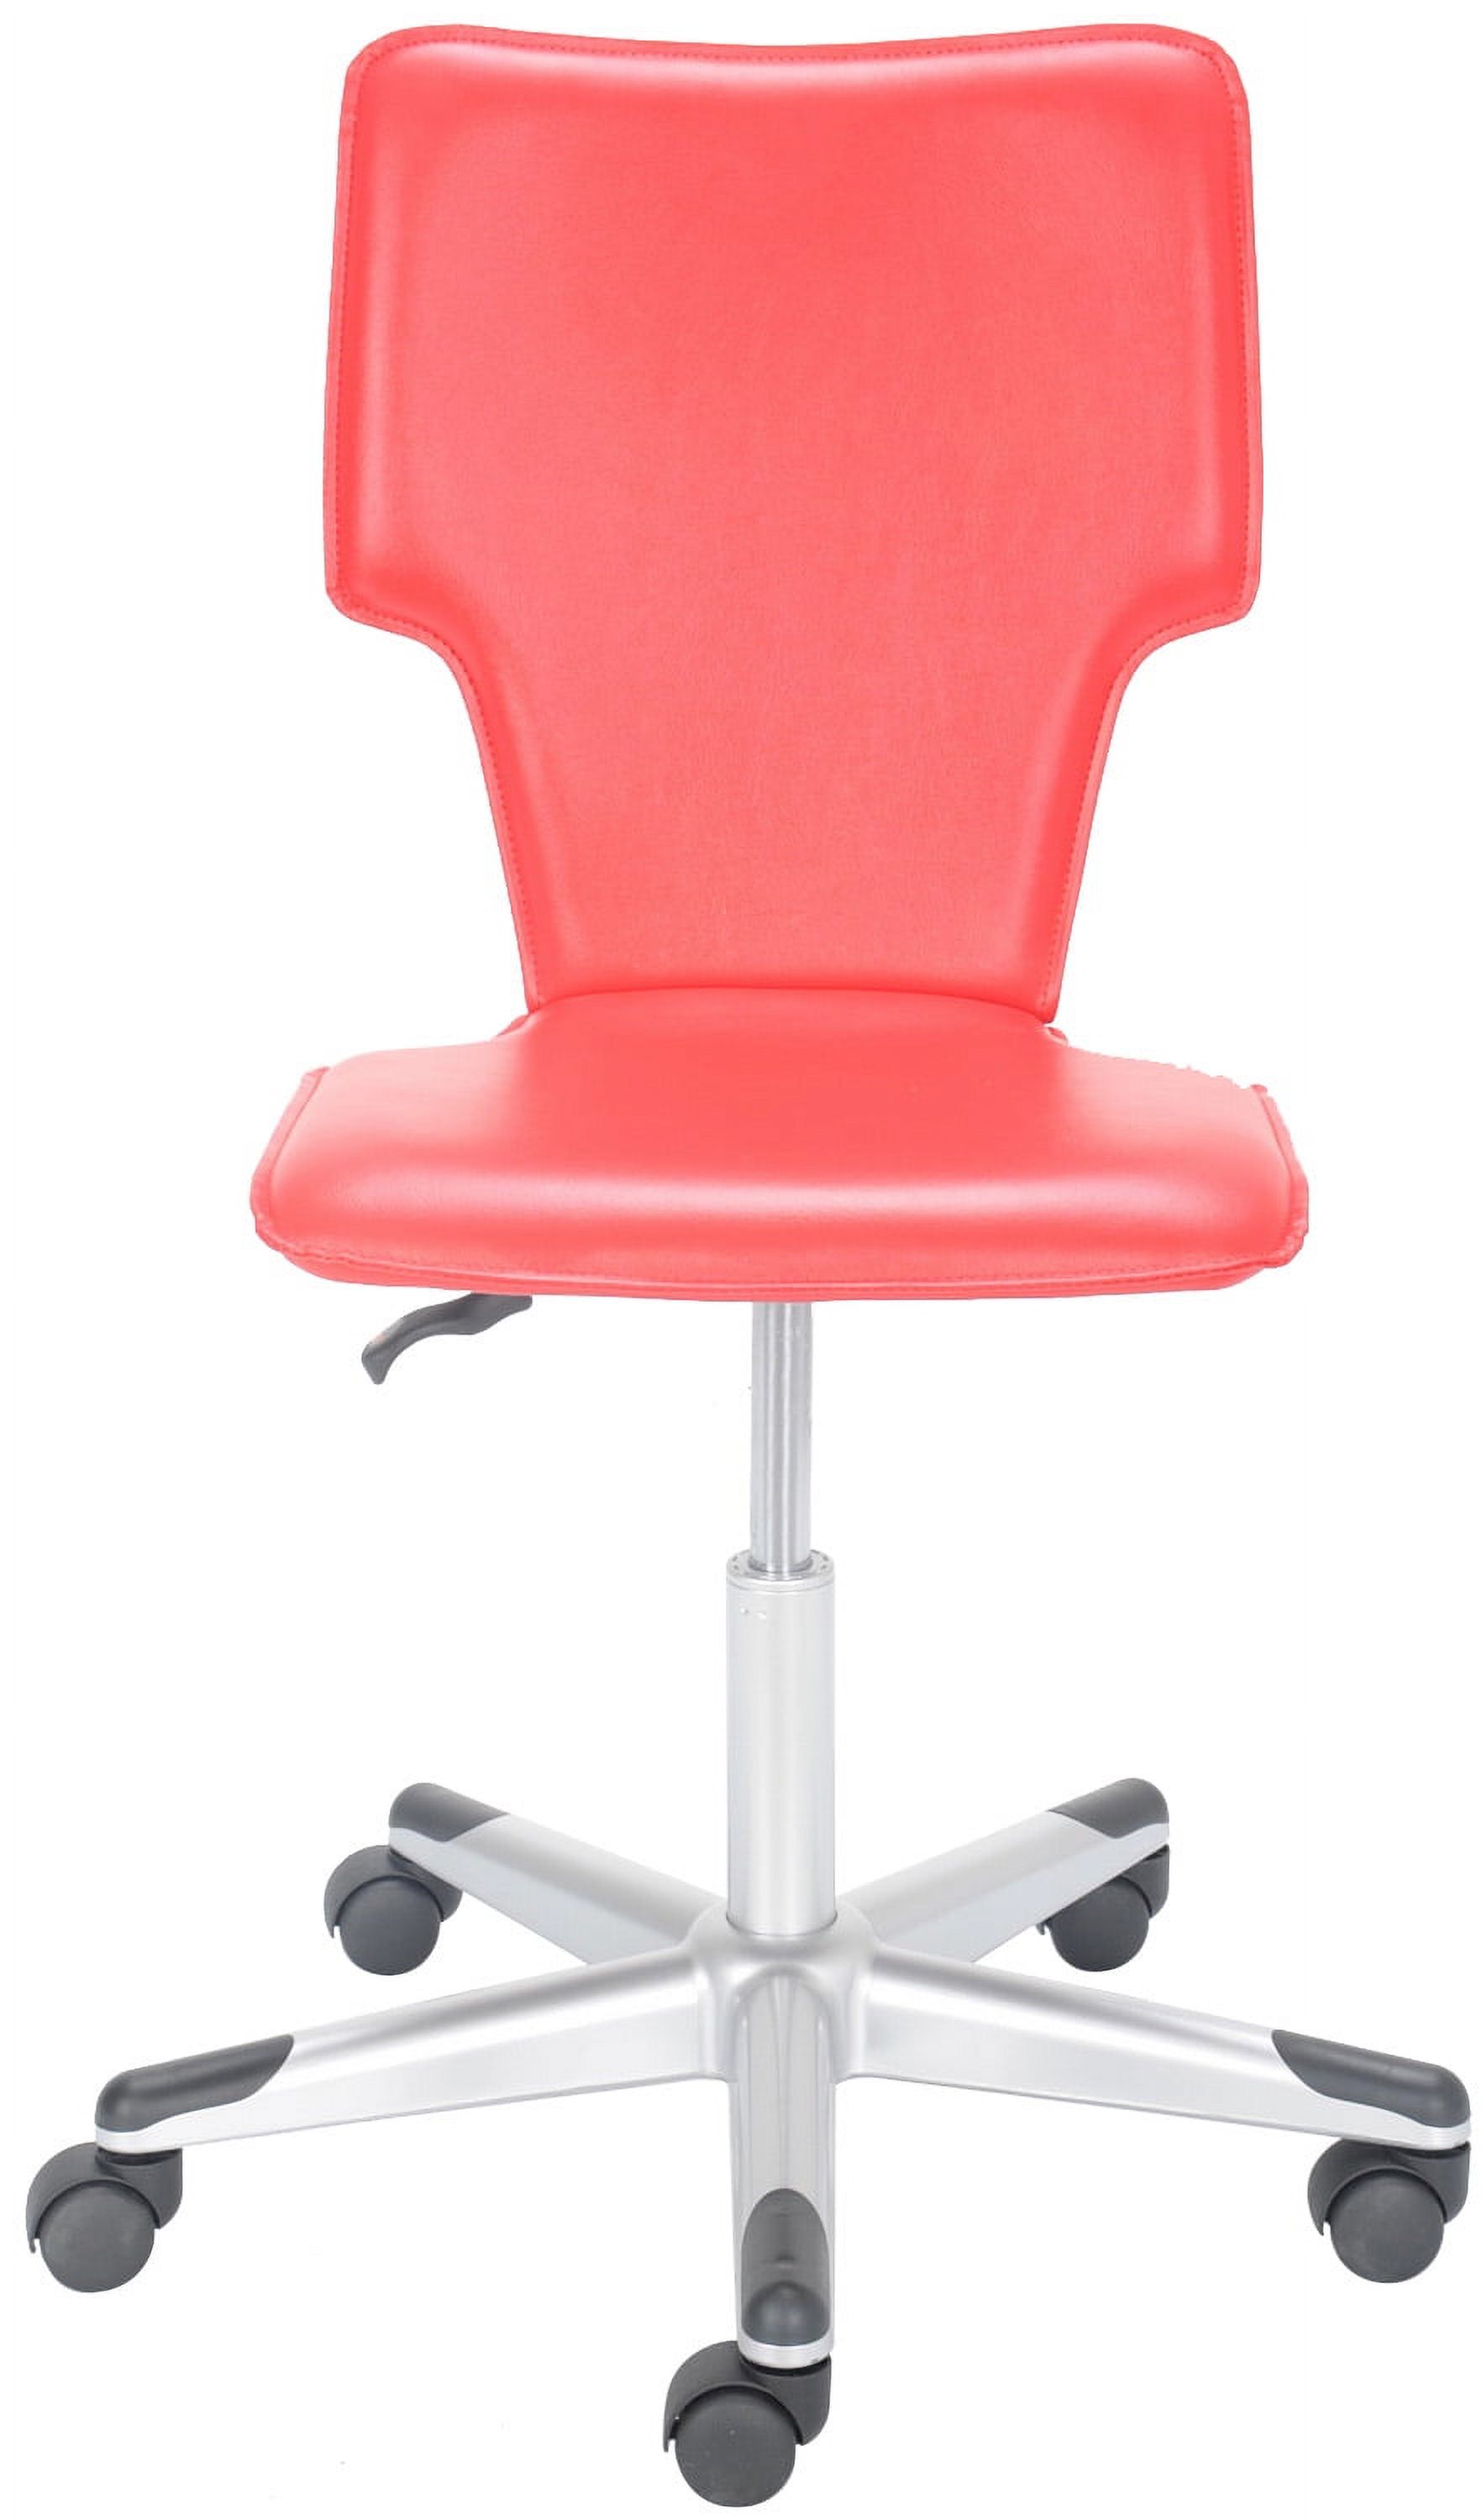 Mainstays Student Office Chair, Multiple Colors - image 3 of 5